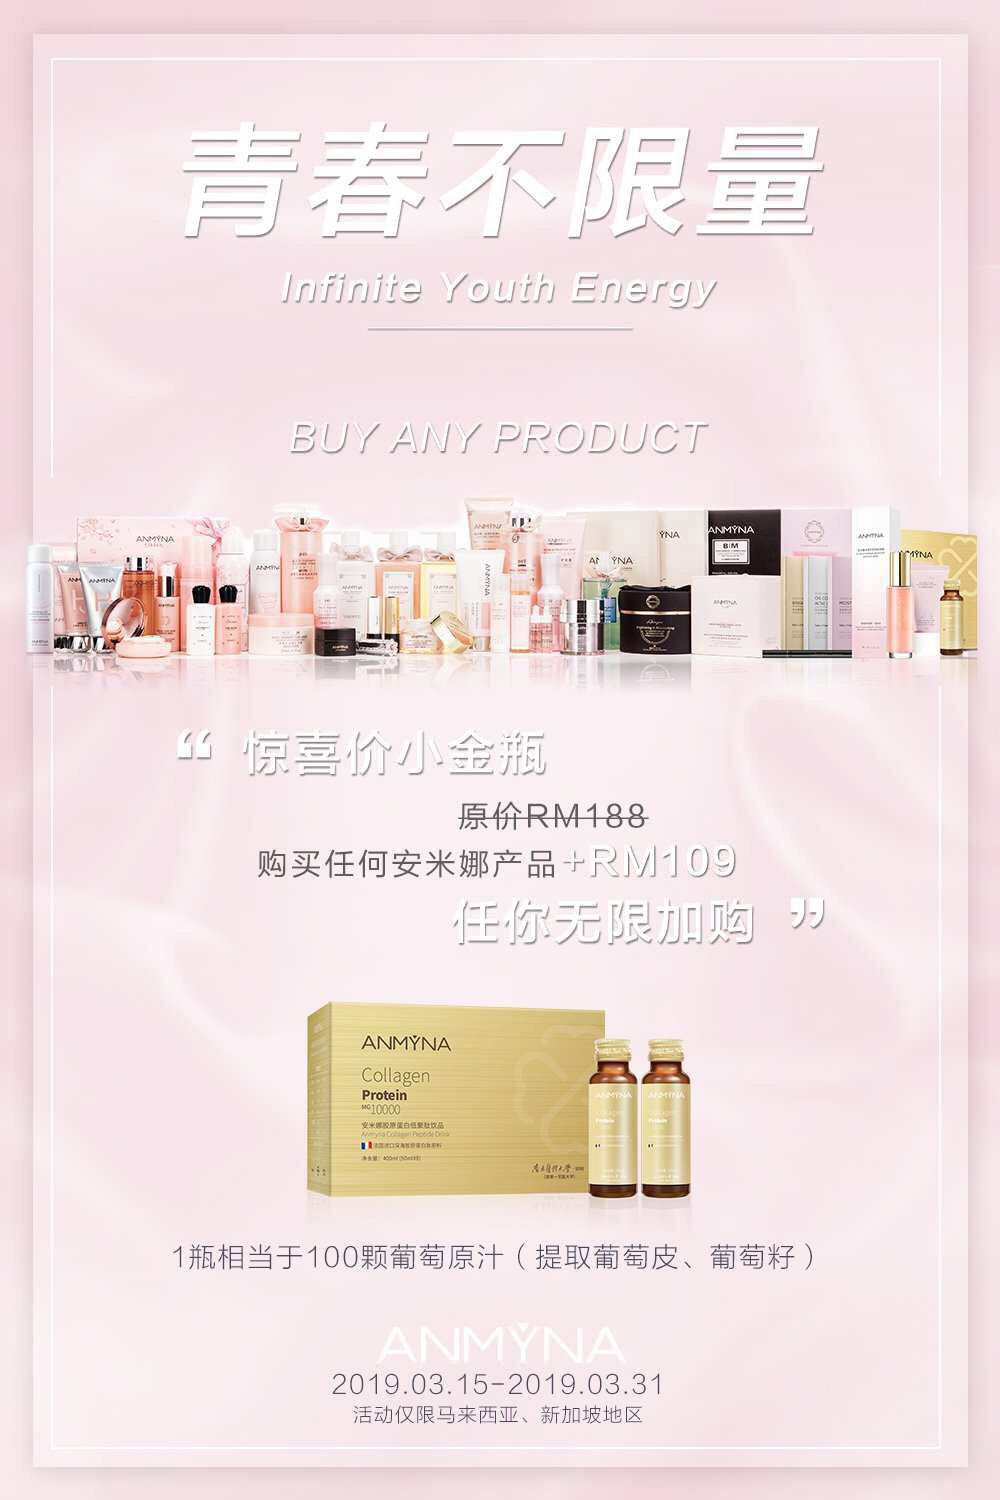 Gold Collagen Peptide Drink, Anmyna Promotion, Collagen, Anmyna Malaysia, Protein, Anmyna Online